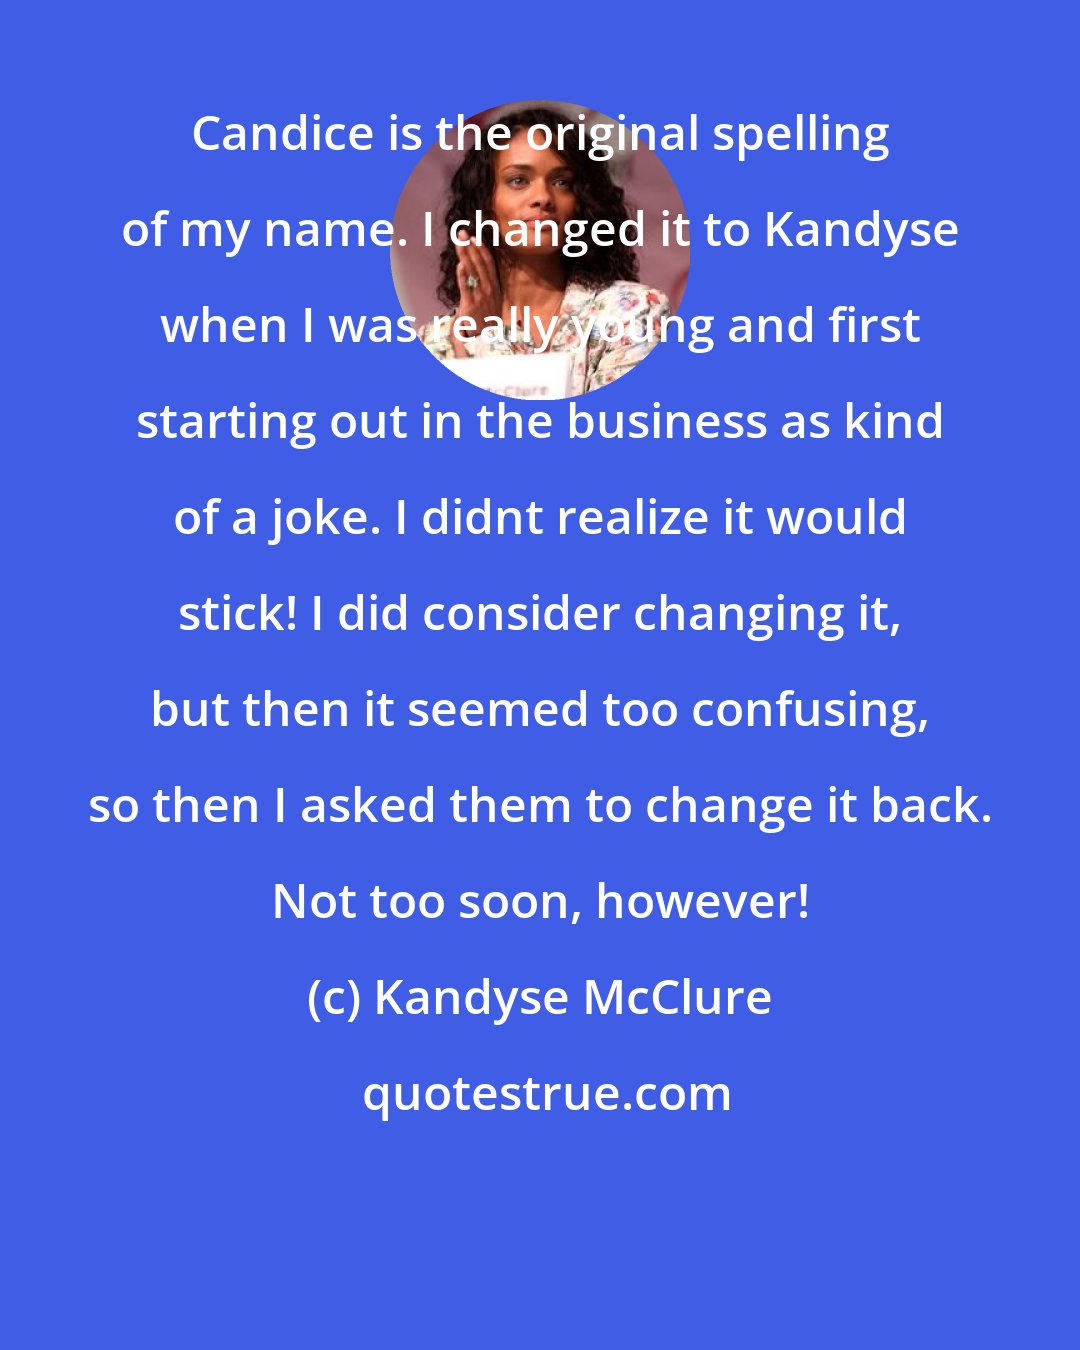 Kandyse McClure: Candice is the original spelling of my name. I changed it to Kandyse when I was really young and first starting out in the business as kind of a joke. I didnt realize it would stick! I did consider changing it, but then it seemed too confusing, so then I asked them to change it back. Not too soon, however!